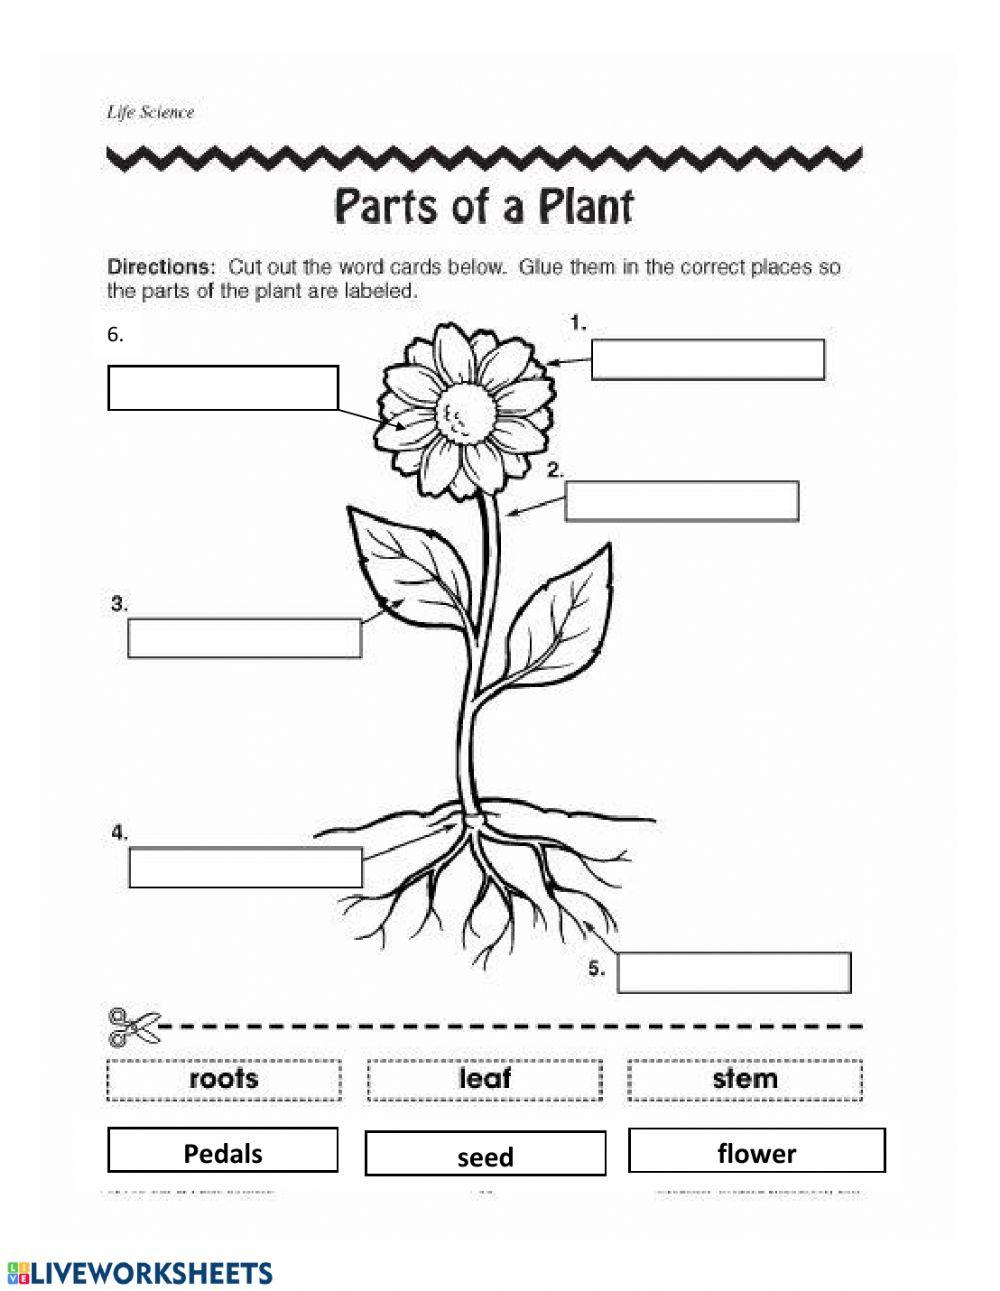 What a plant needs and parts of a plant